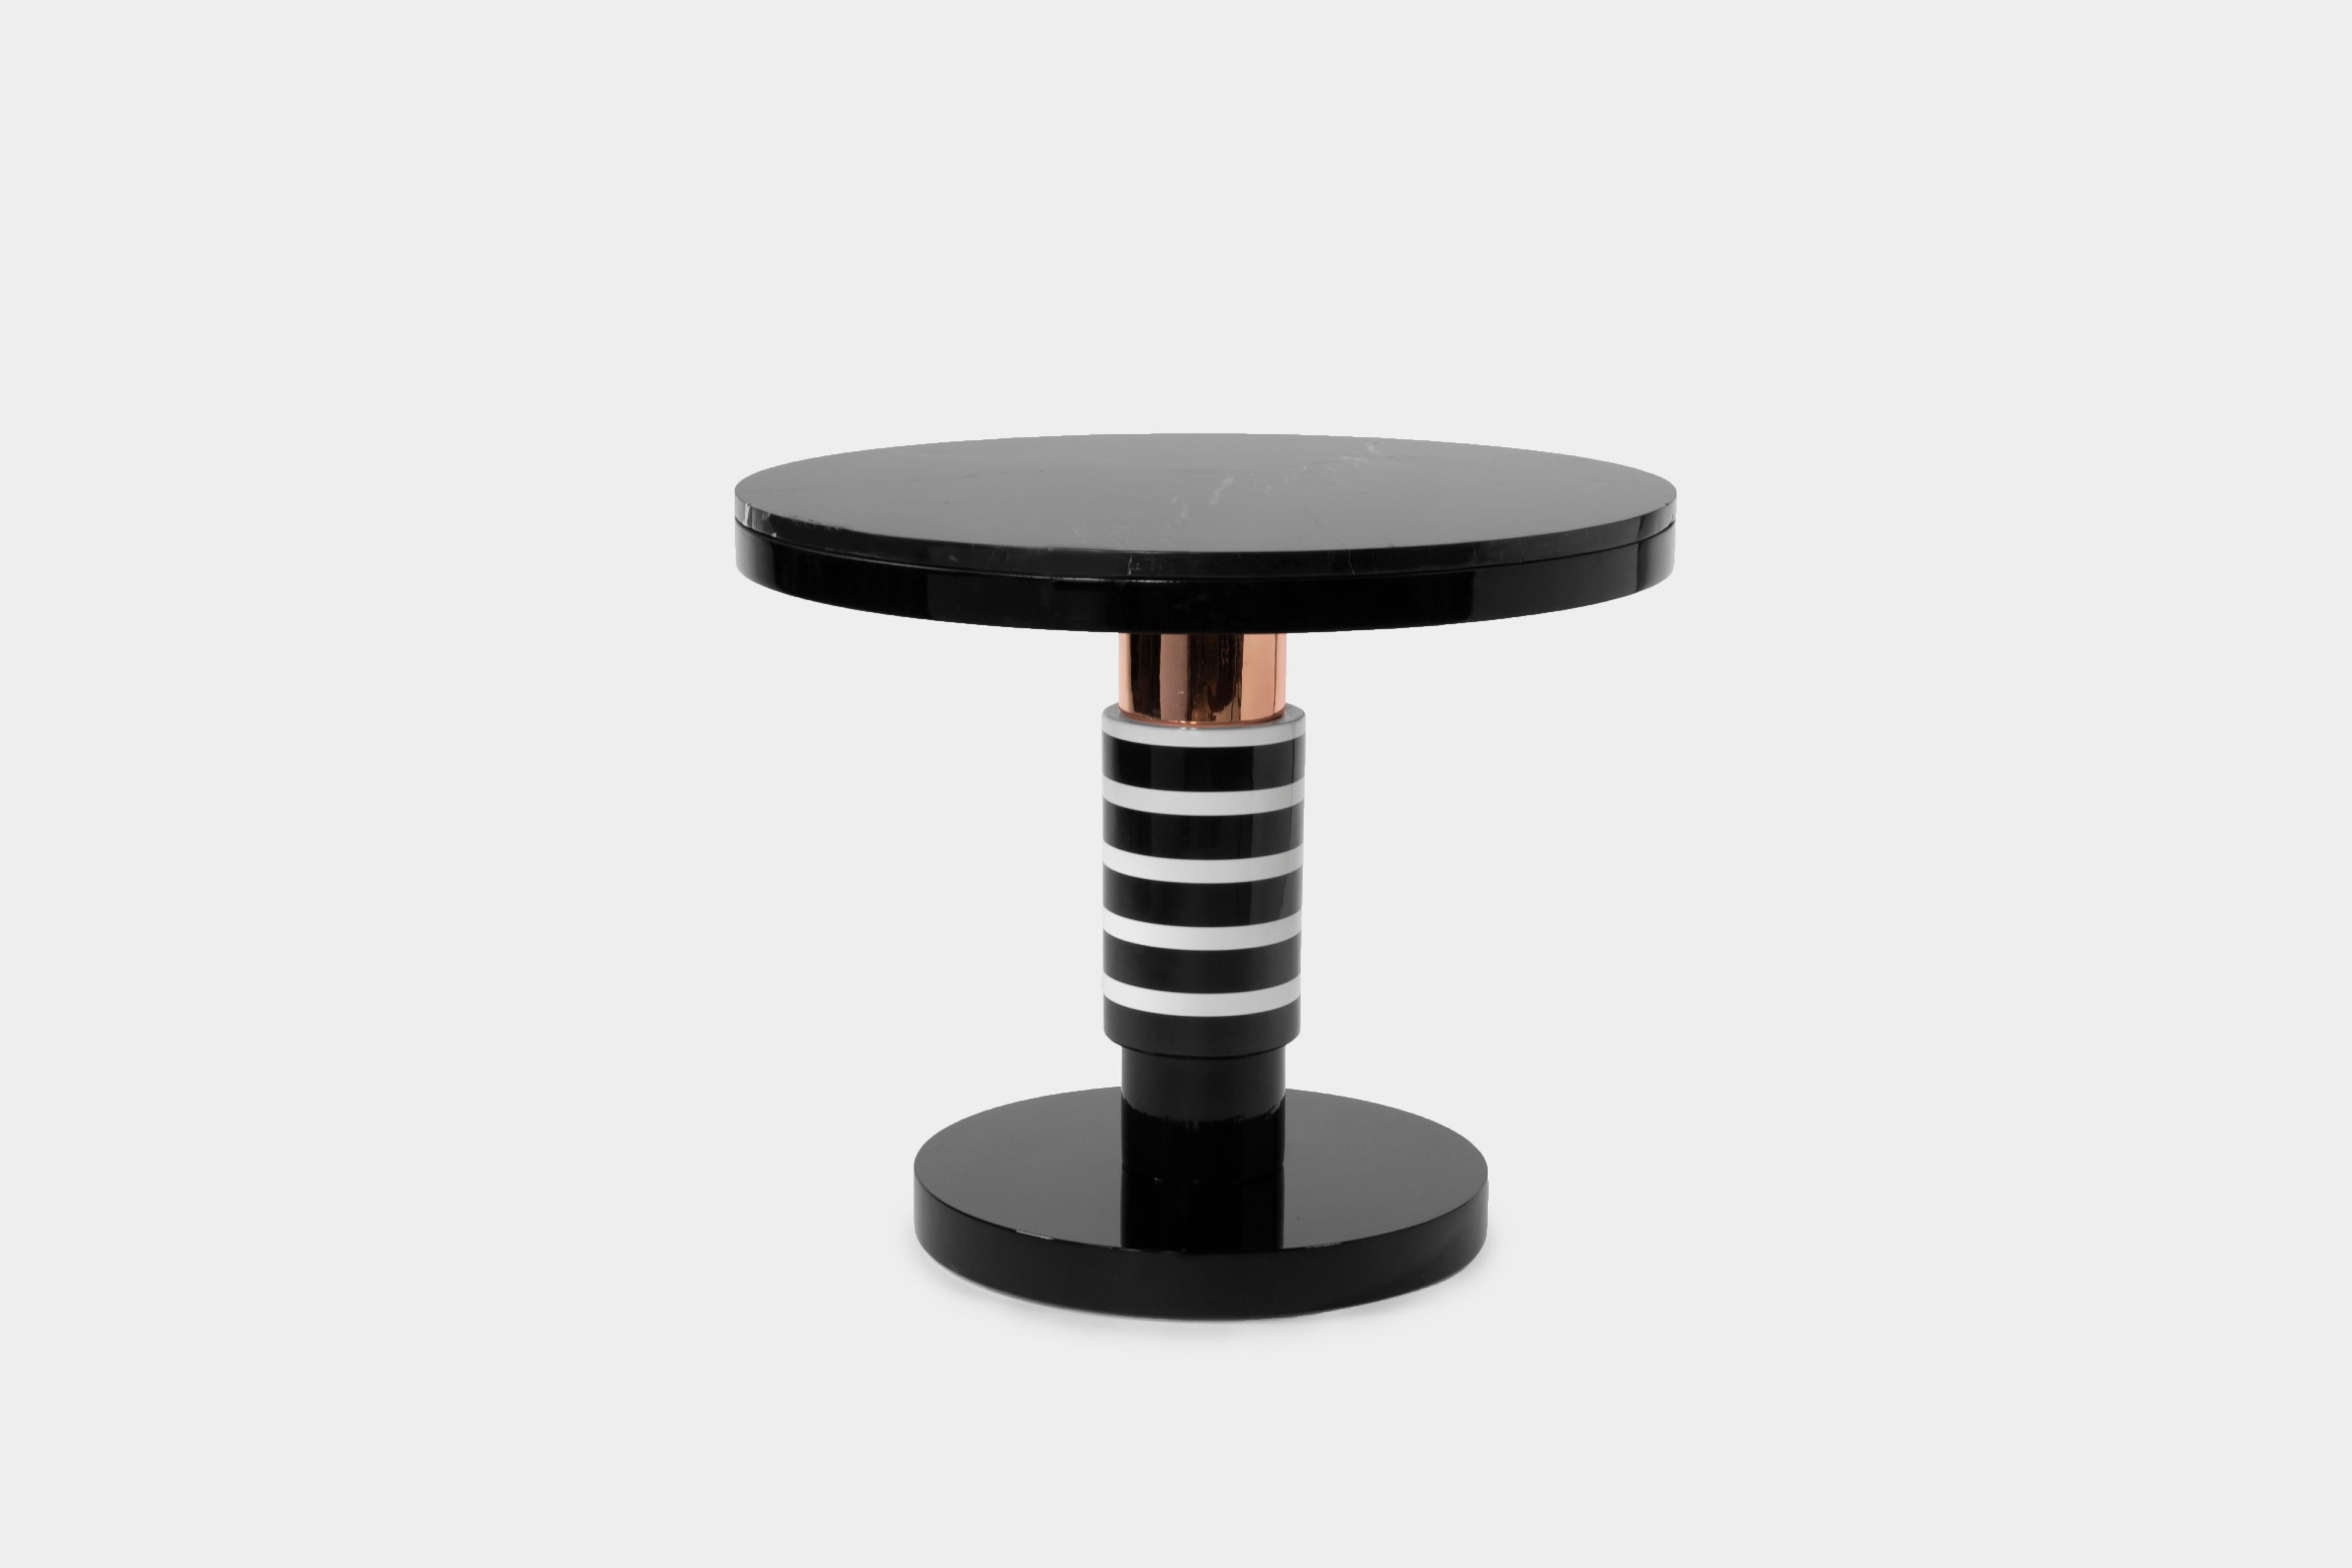 Large ceramic and marble coffee table by Eric Willemart

Materials: Handcrafted ceramic glazed in black and white and copper finishes
Base: glazed ceramic on an aluminium plate
Top: polished Nero Marquina marble, plate embedded in a